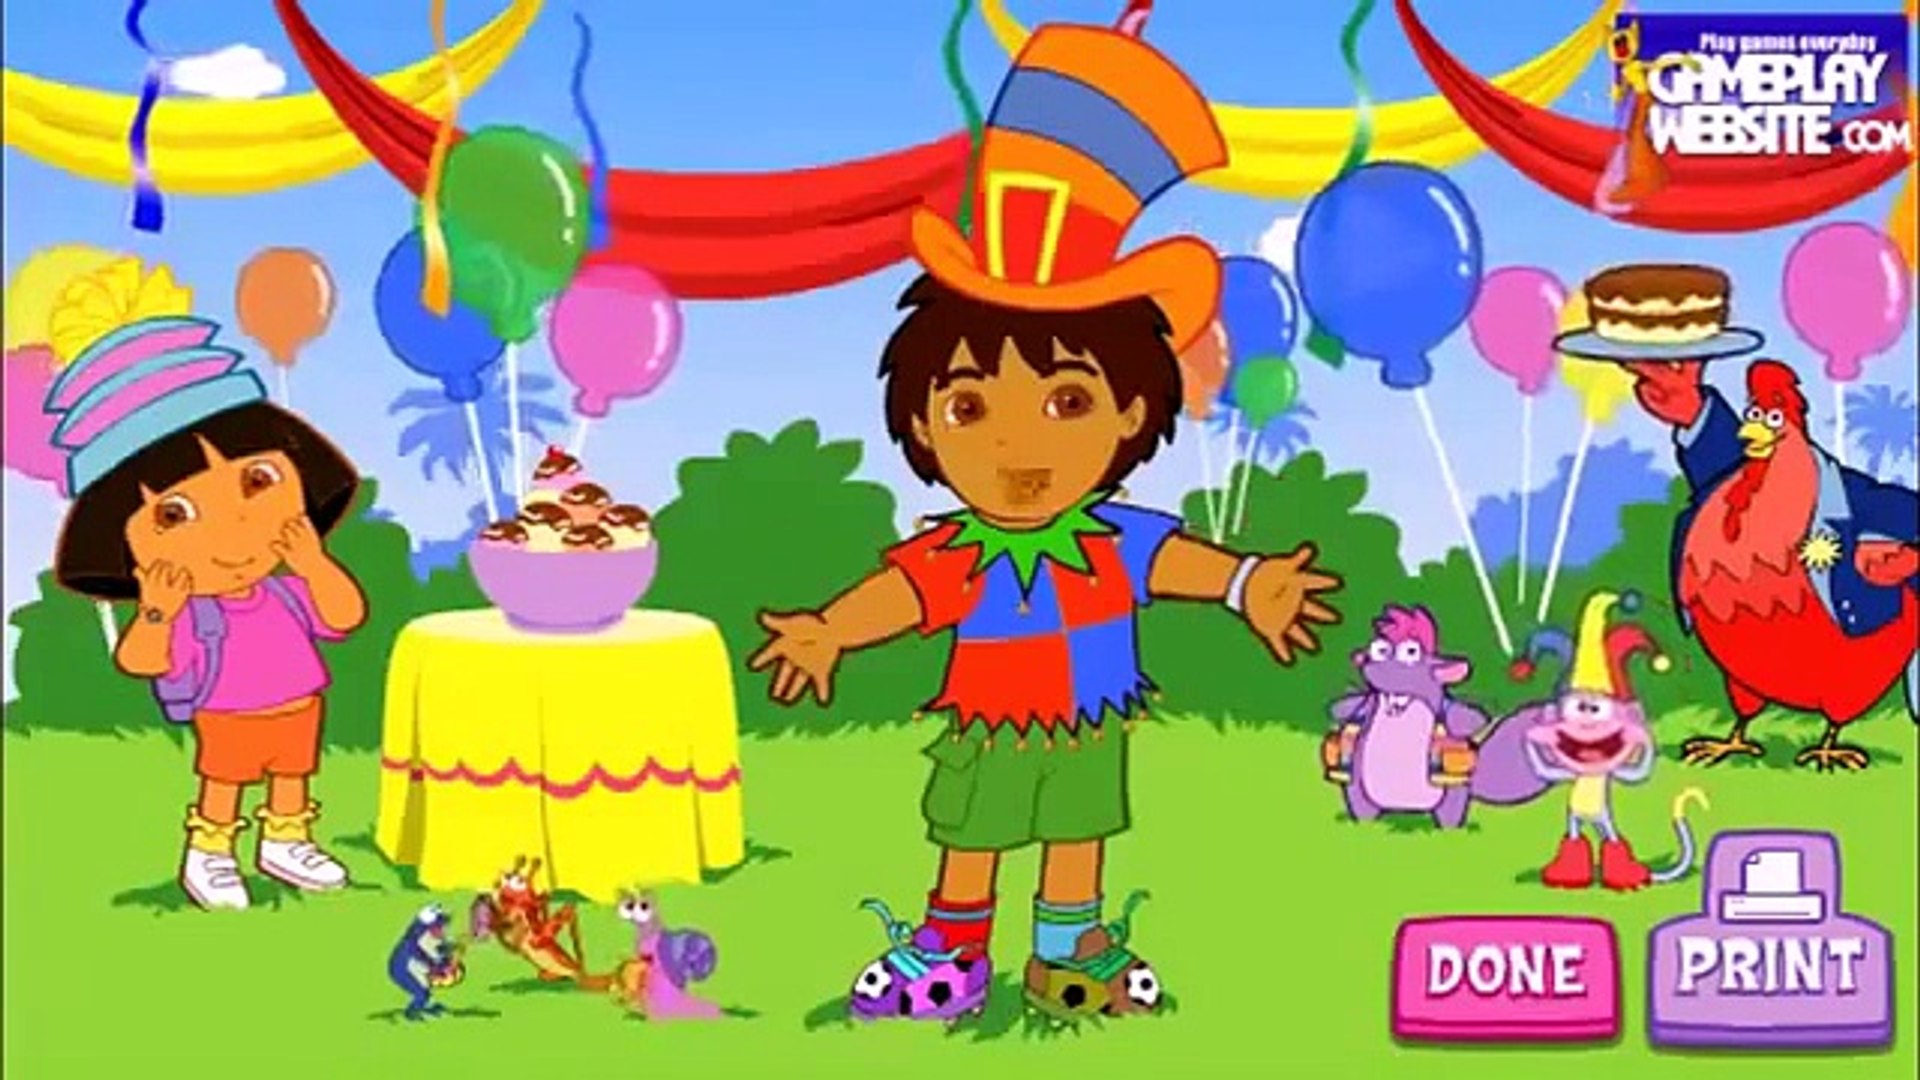 Diego and Dora the explorer long movie full episodes in Spanish and English 9KpWJeKCOM0